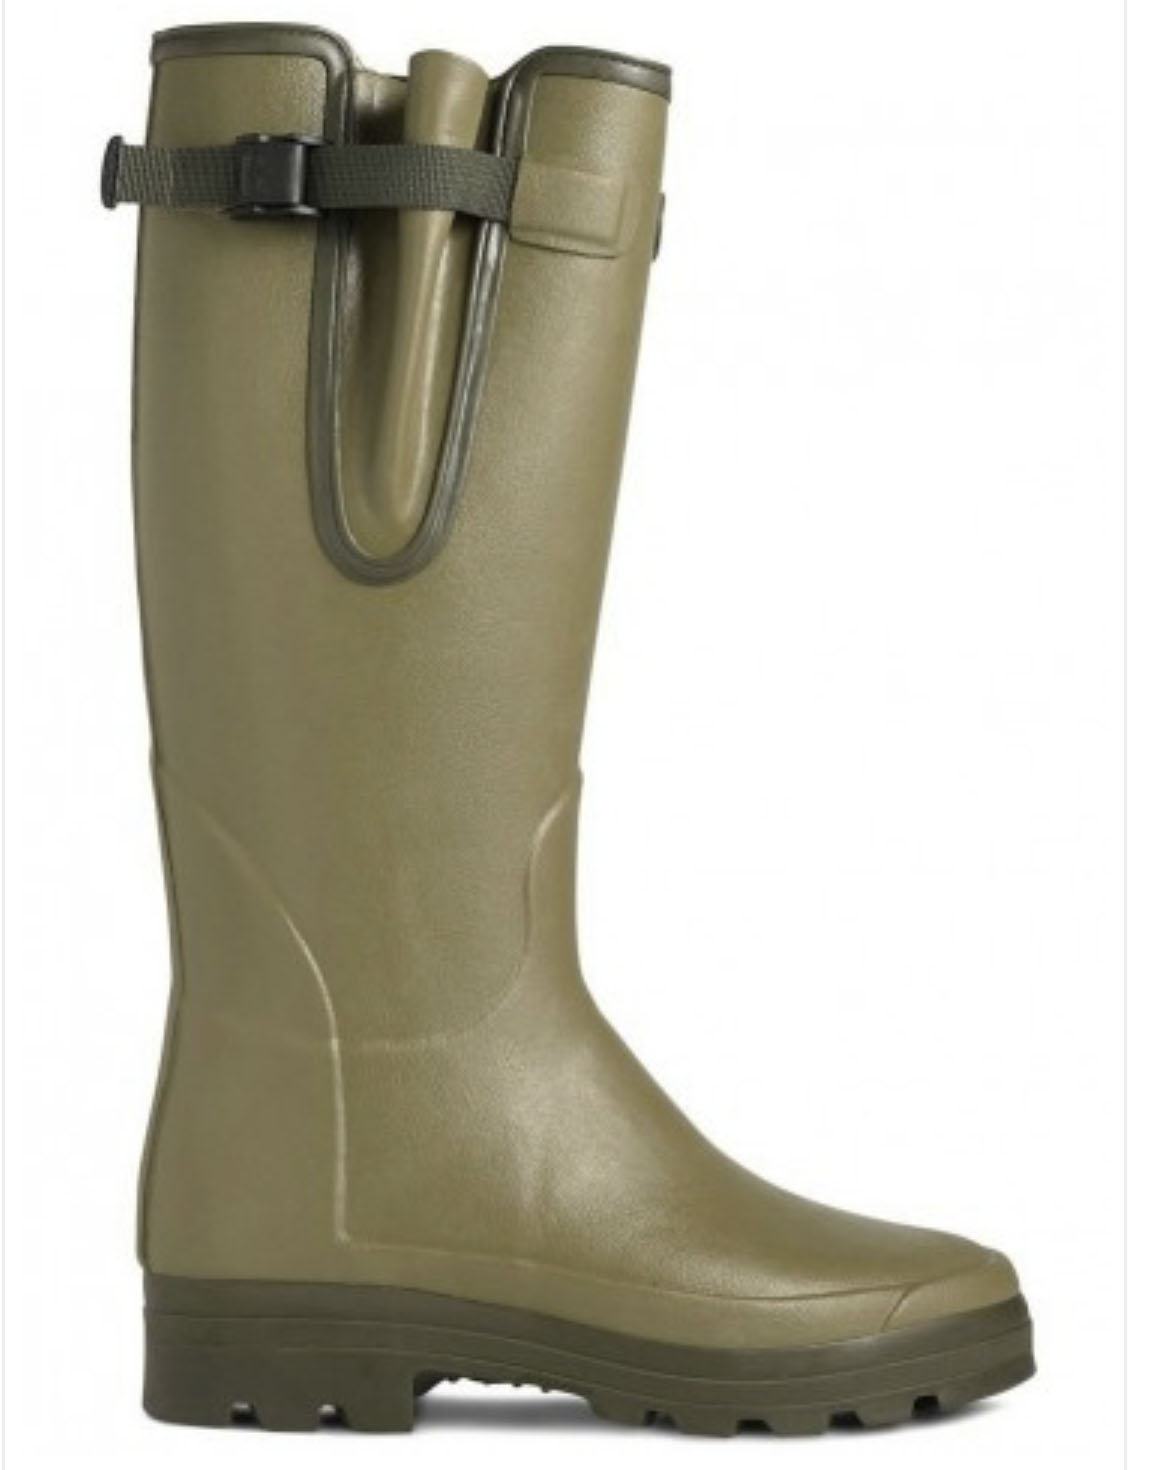 rubber hunting boots